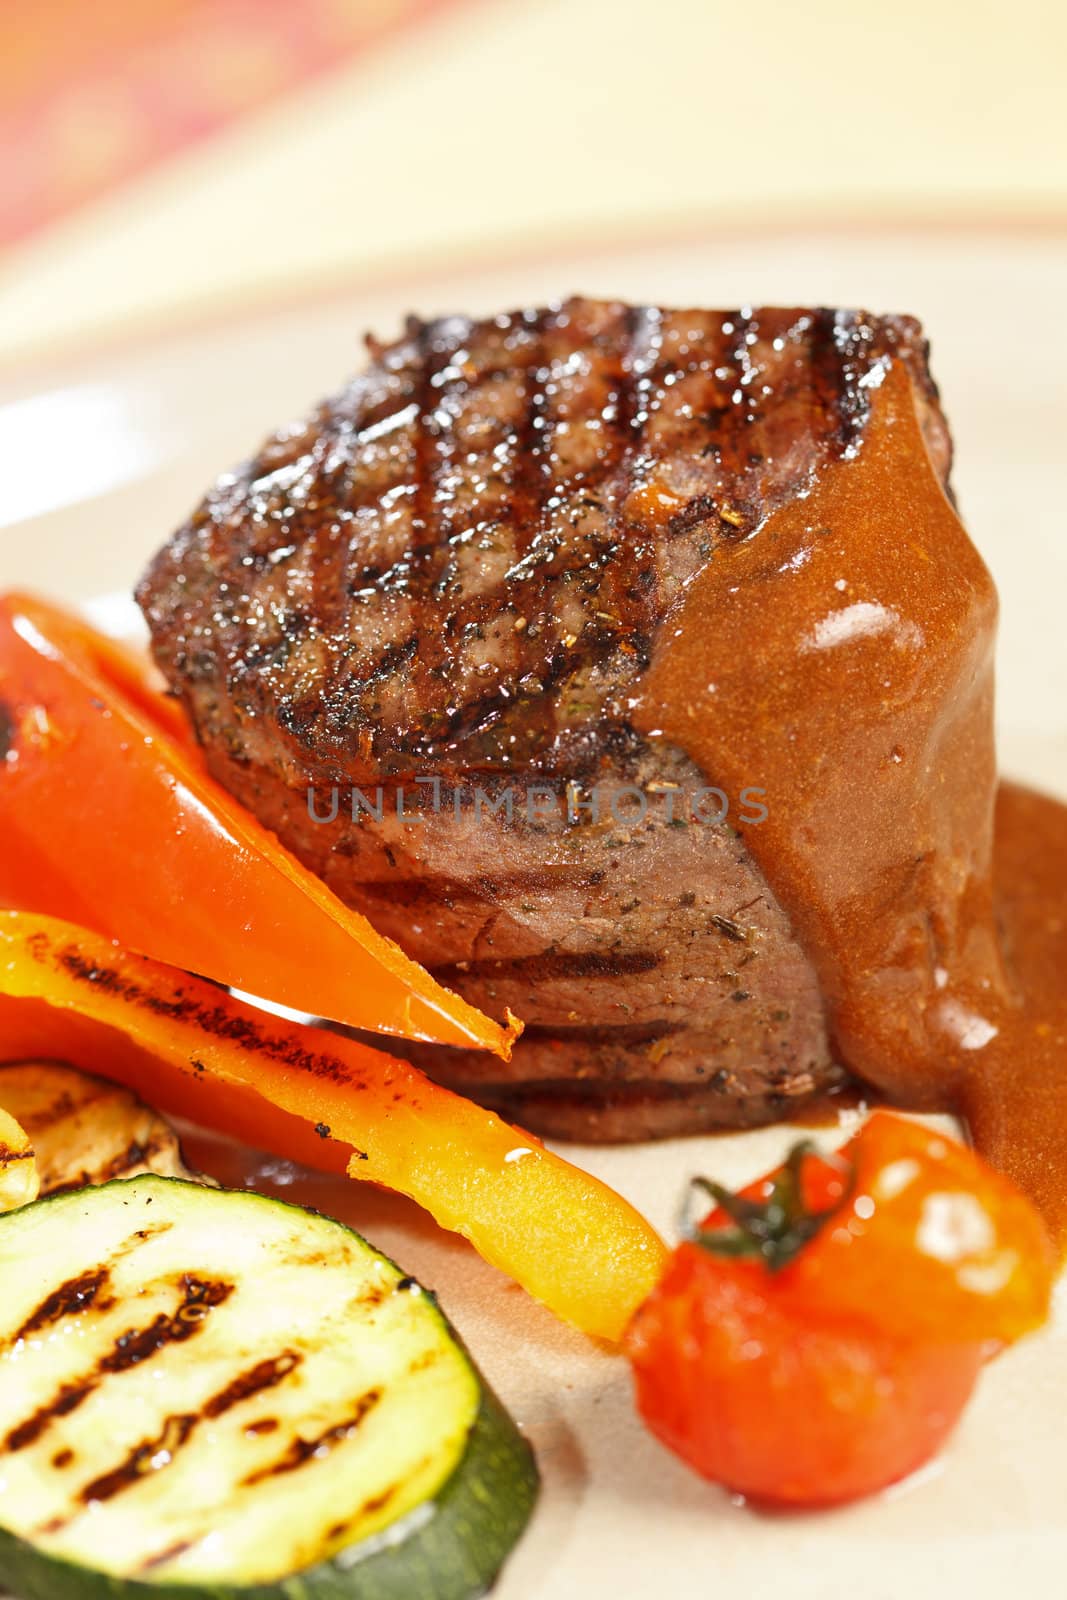 steak with grilled vegetables by shebeko